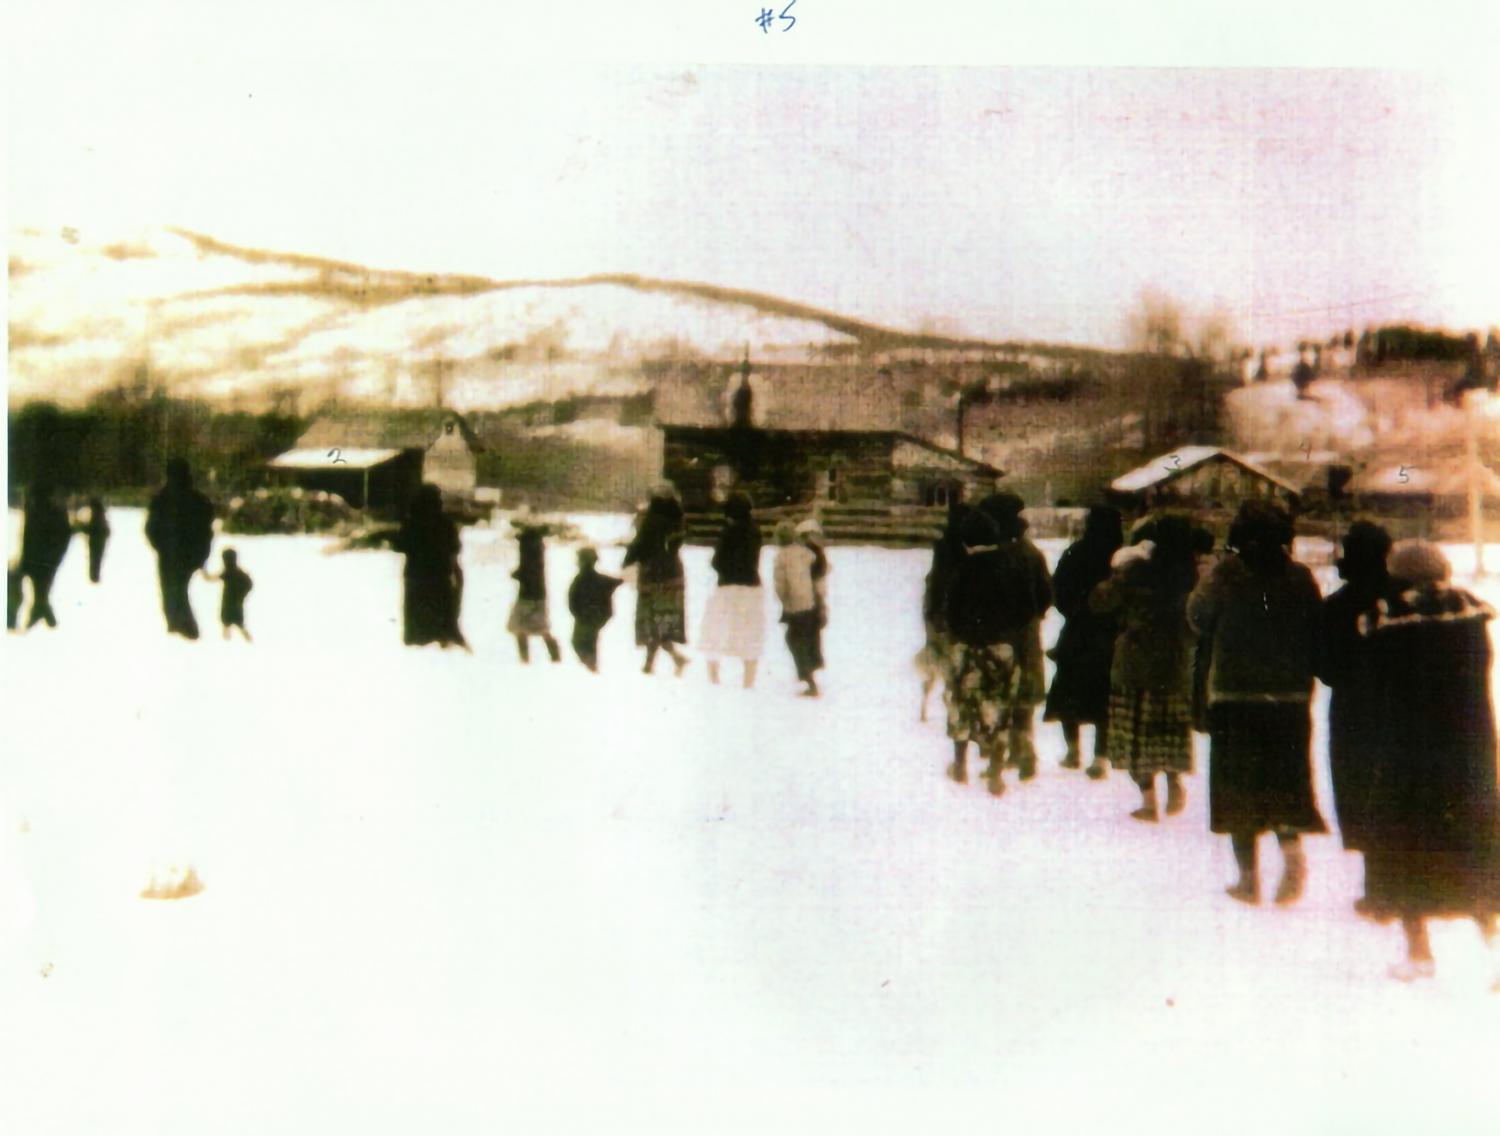 The Cheslatta leaving their homes in 1952.